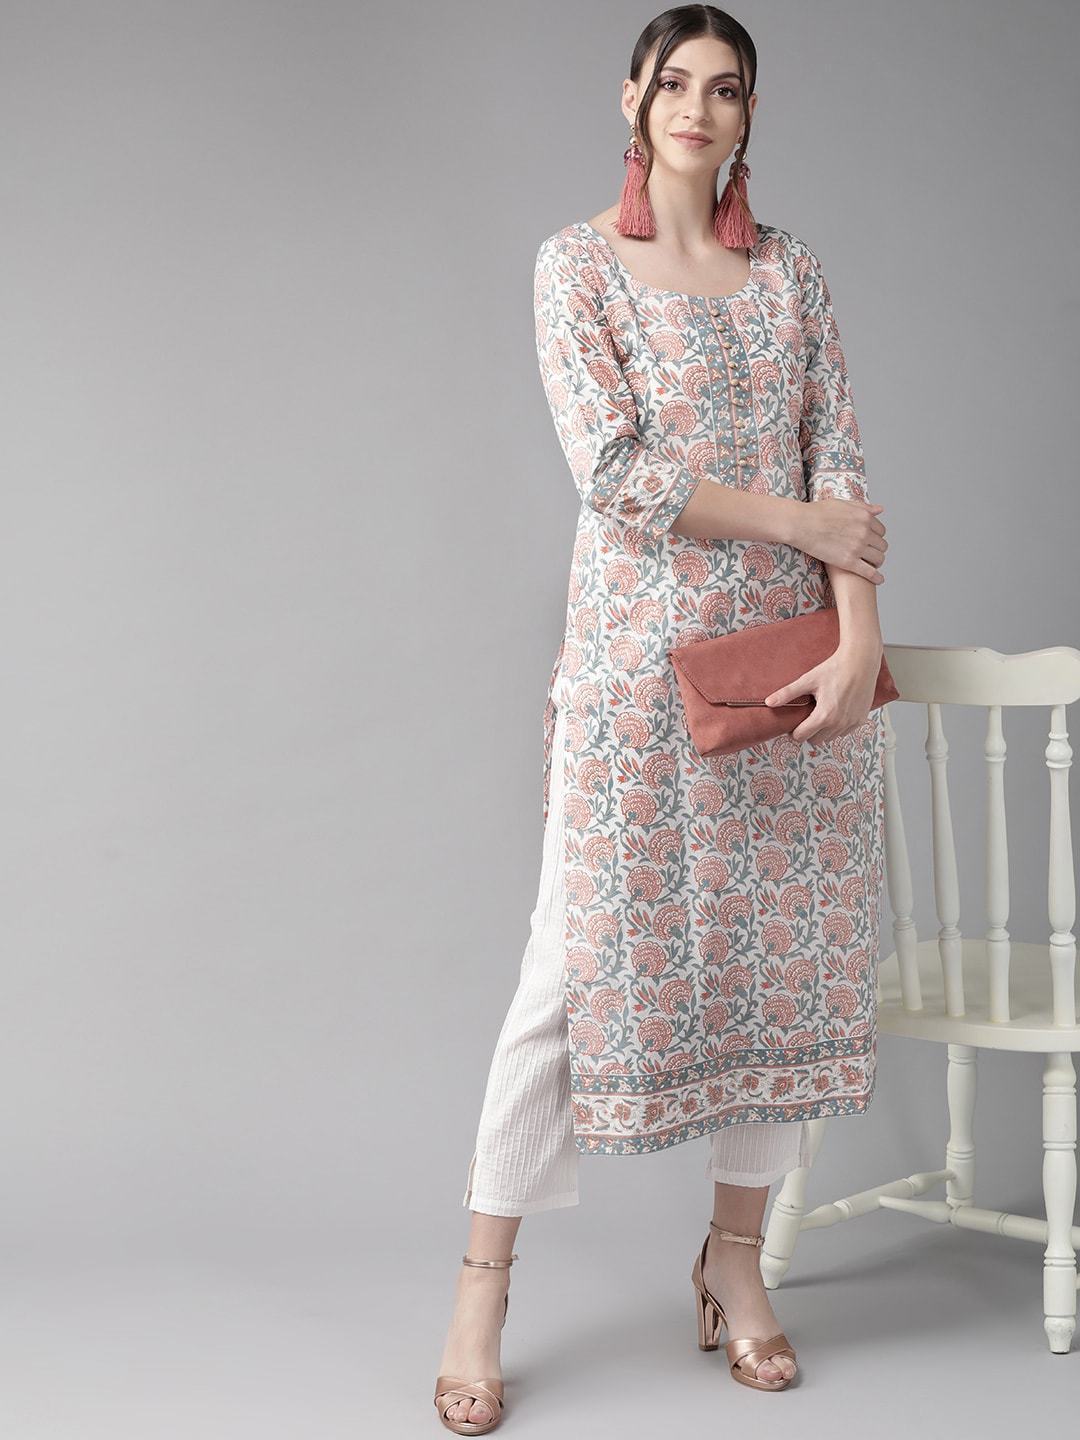 Women's  Floral Printed Straight Kurta in White & Rust Red - AKS USA